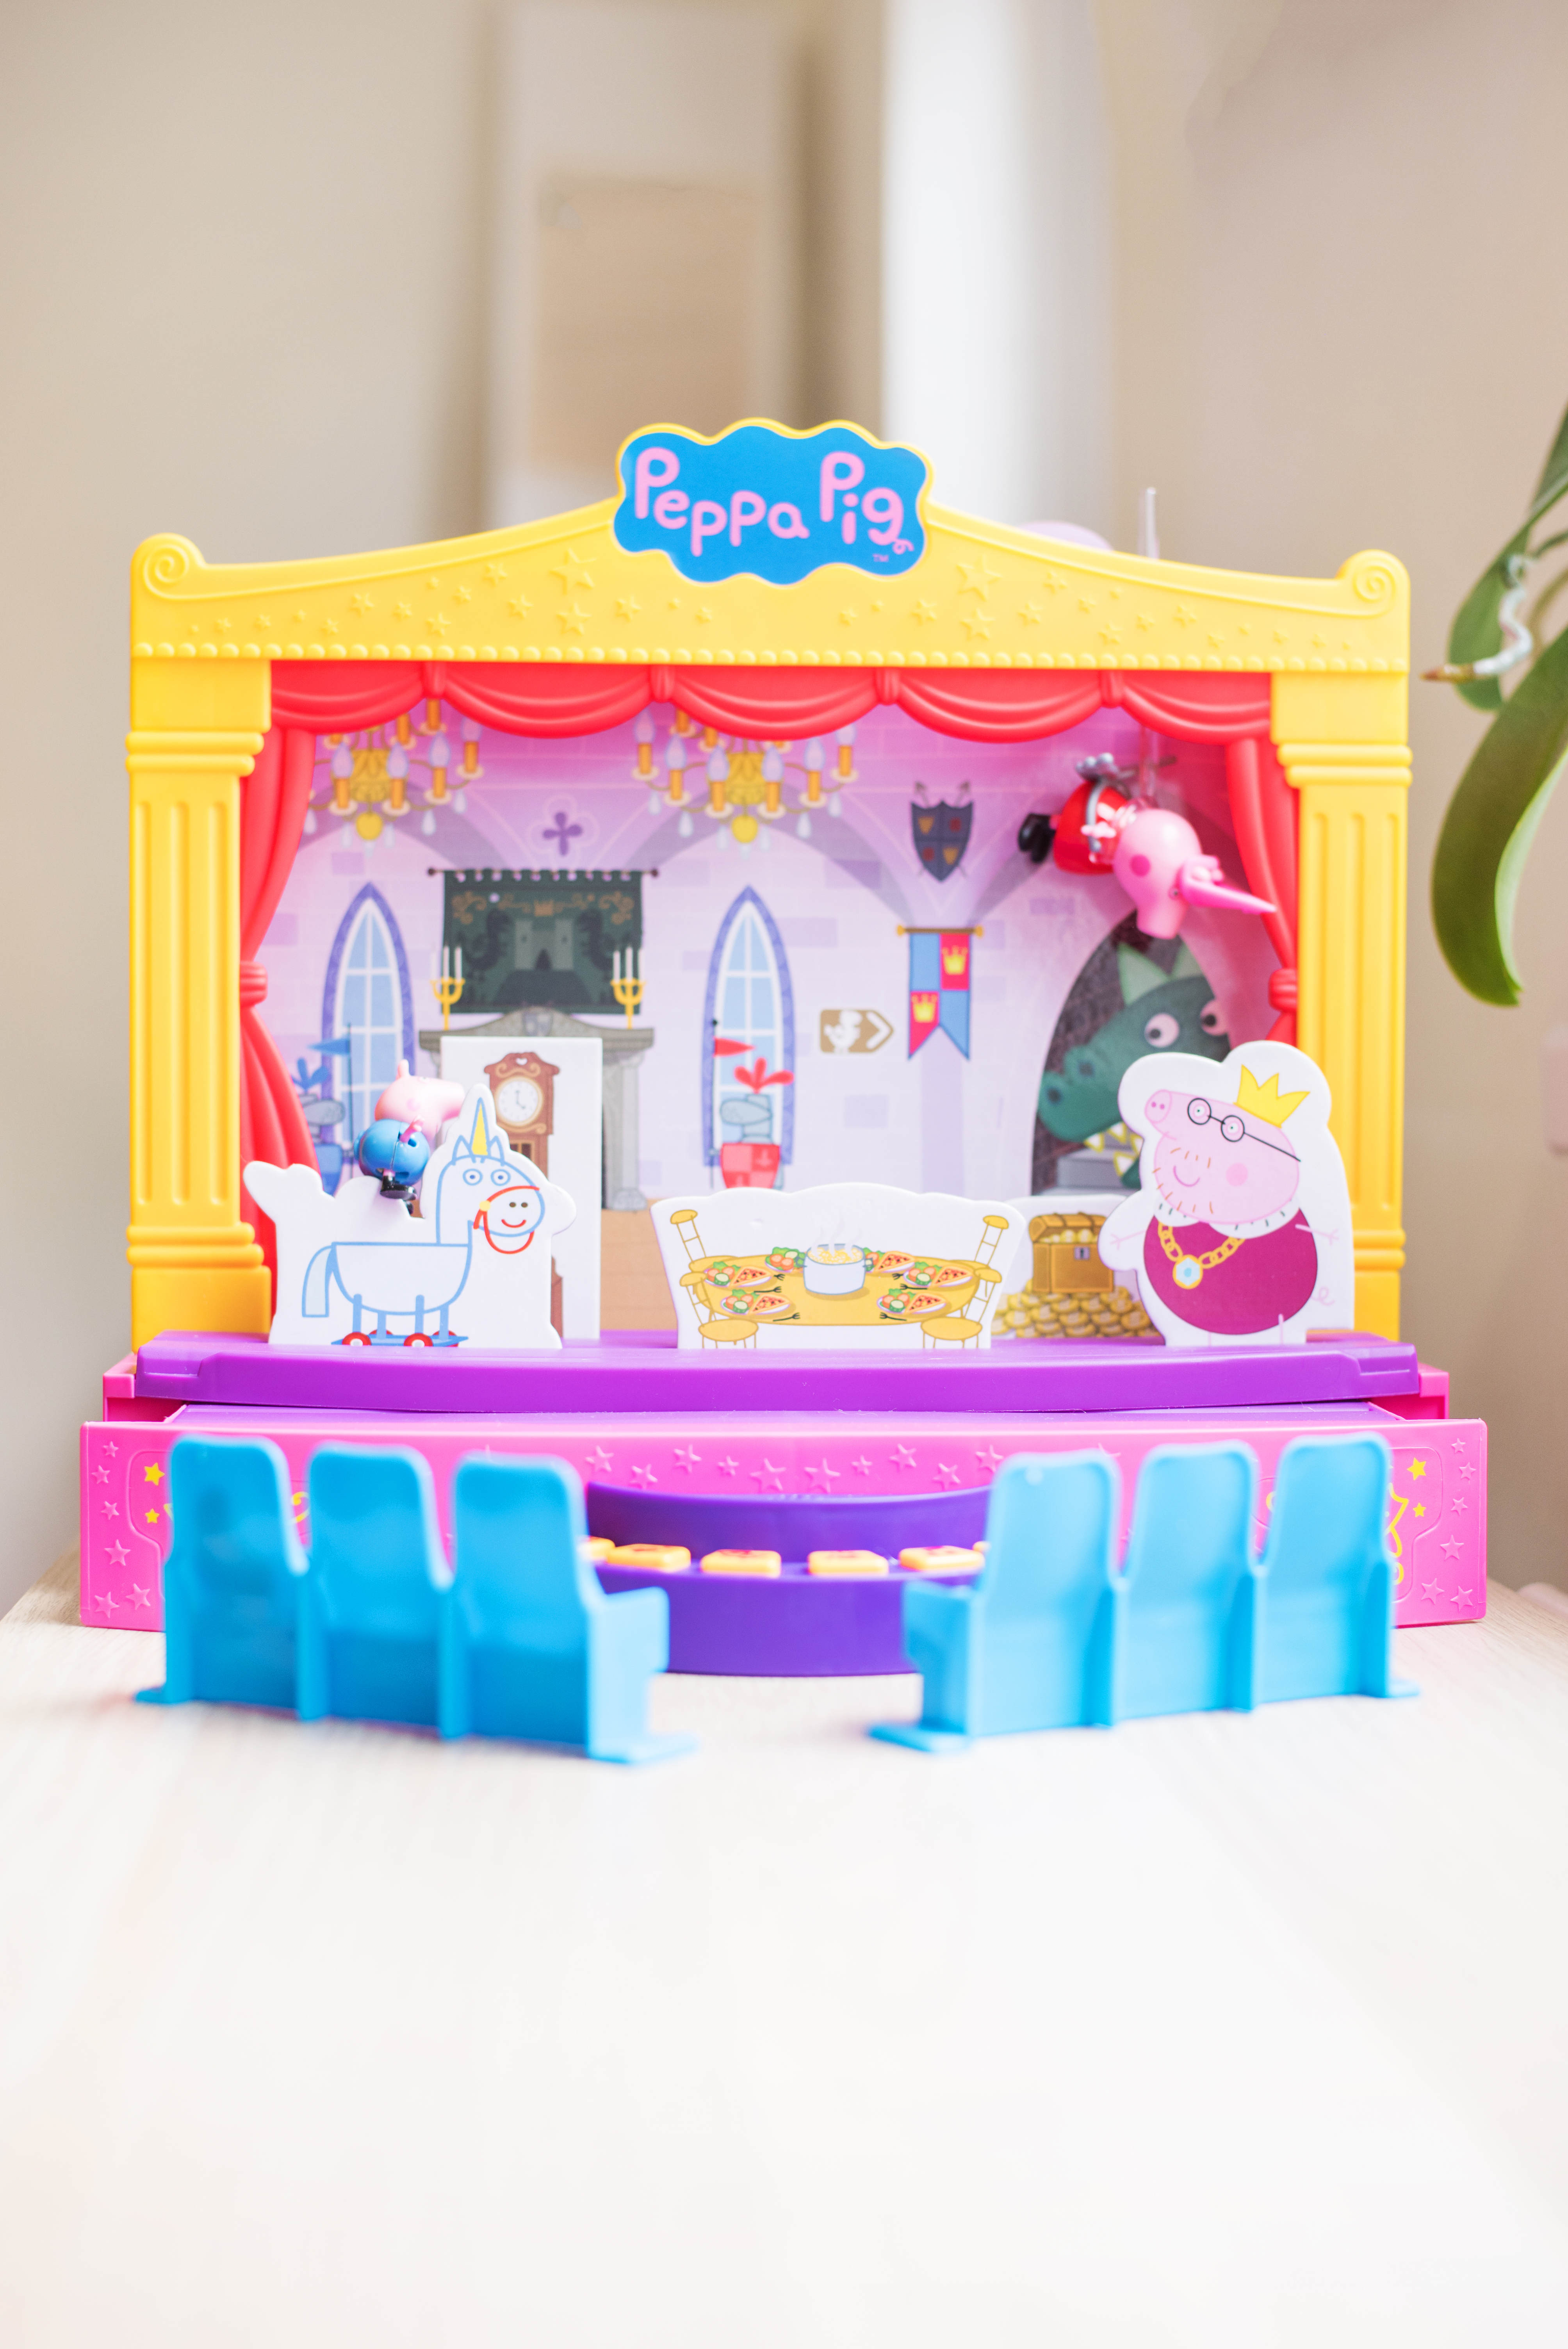 PEPPA PIG STAGE PLAYSET REVIEW